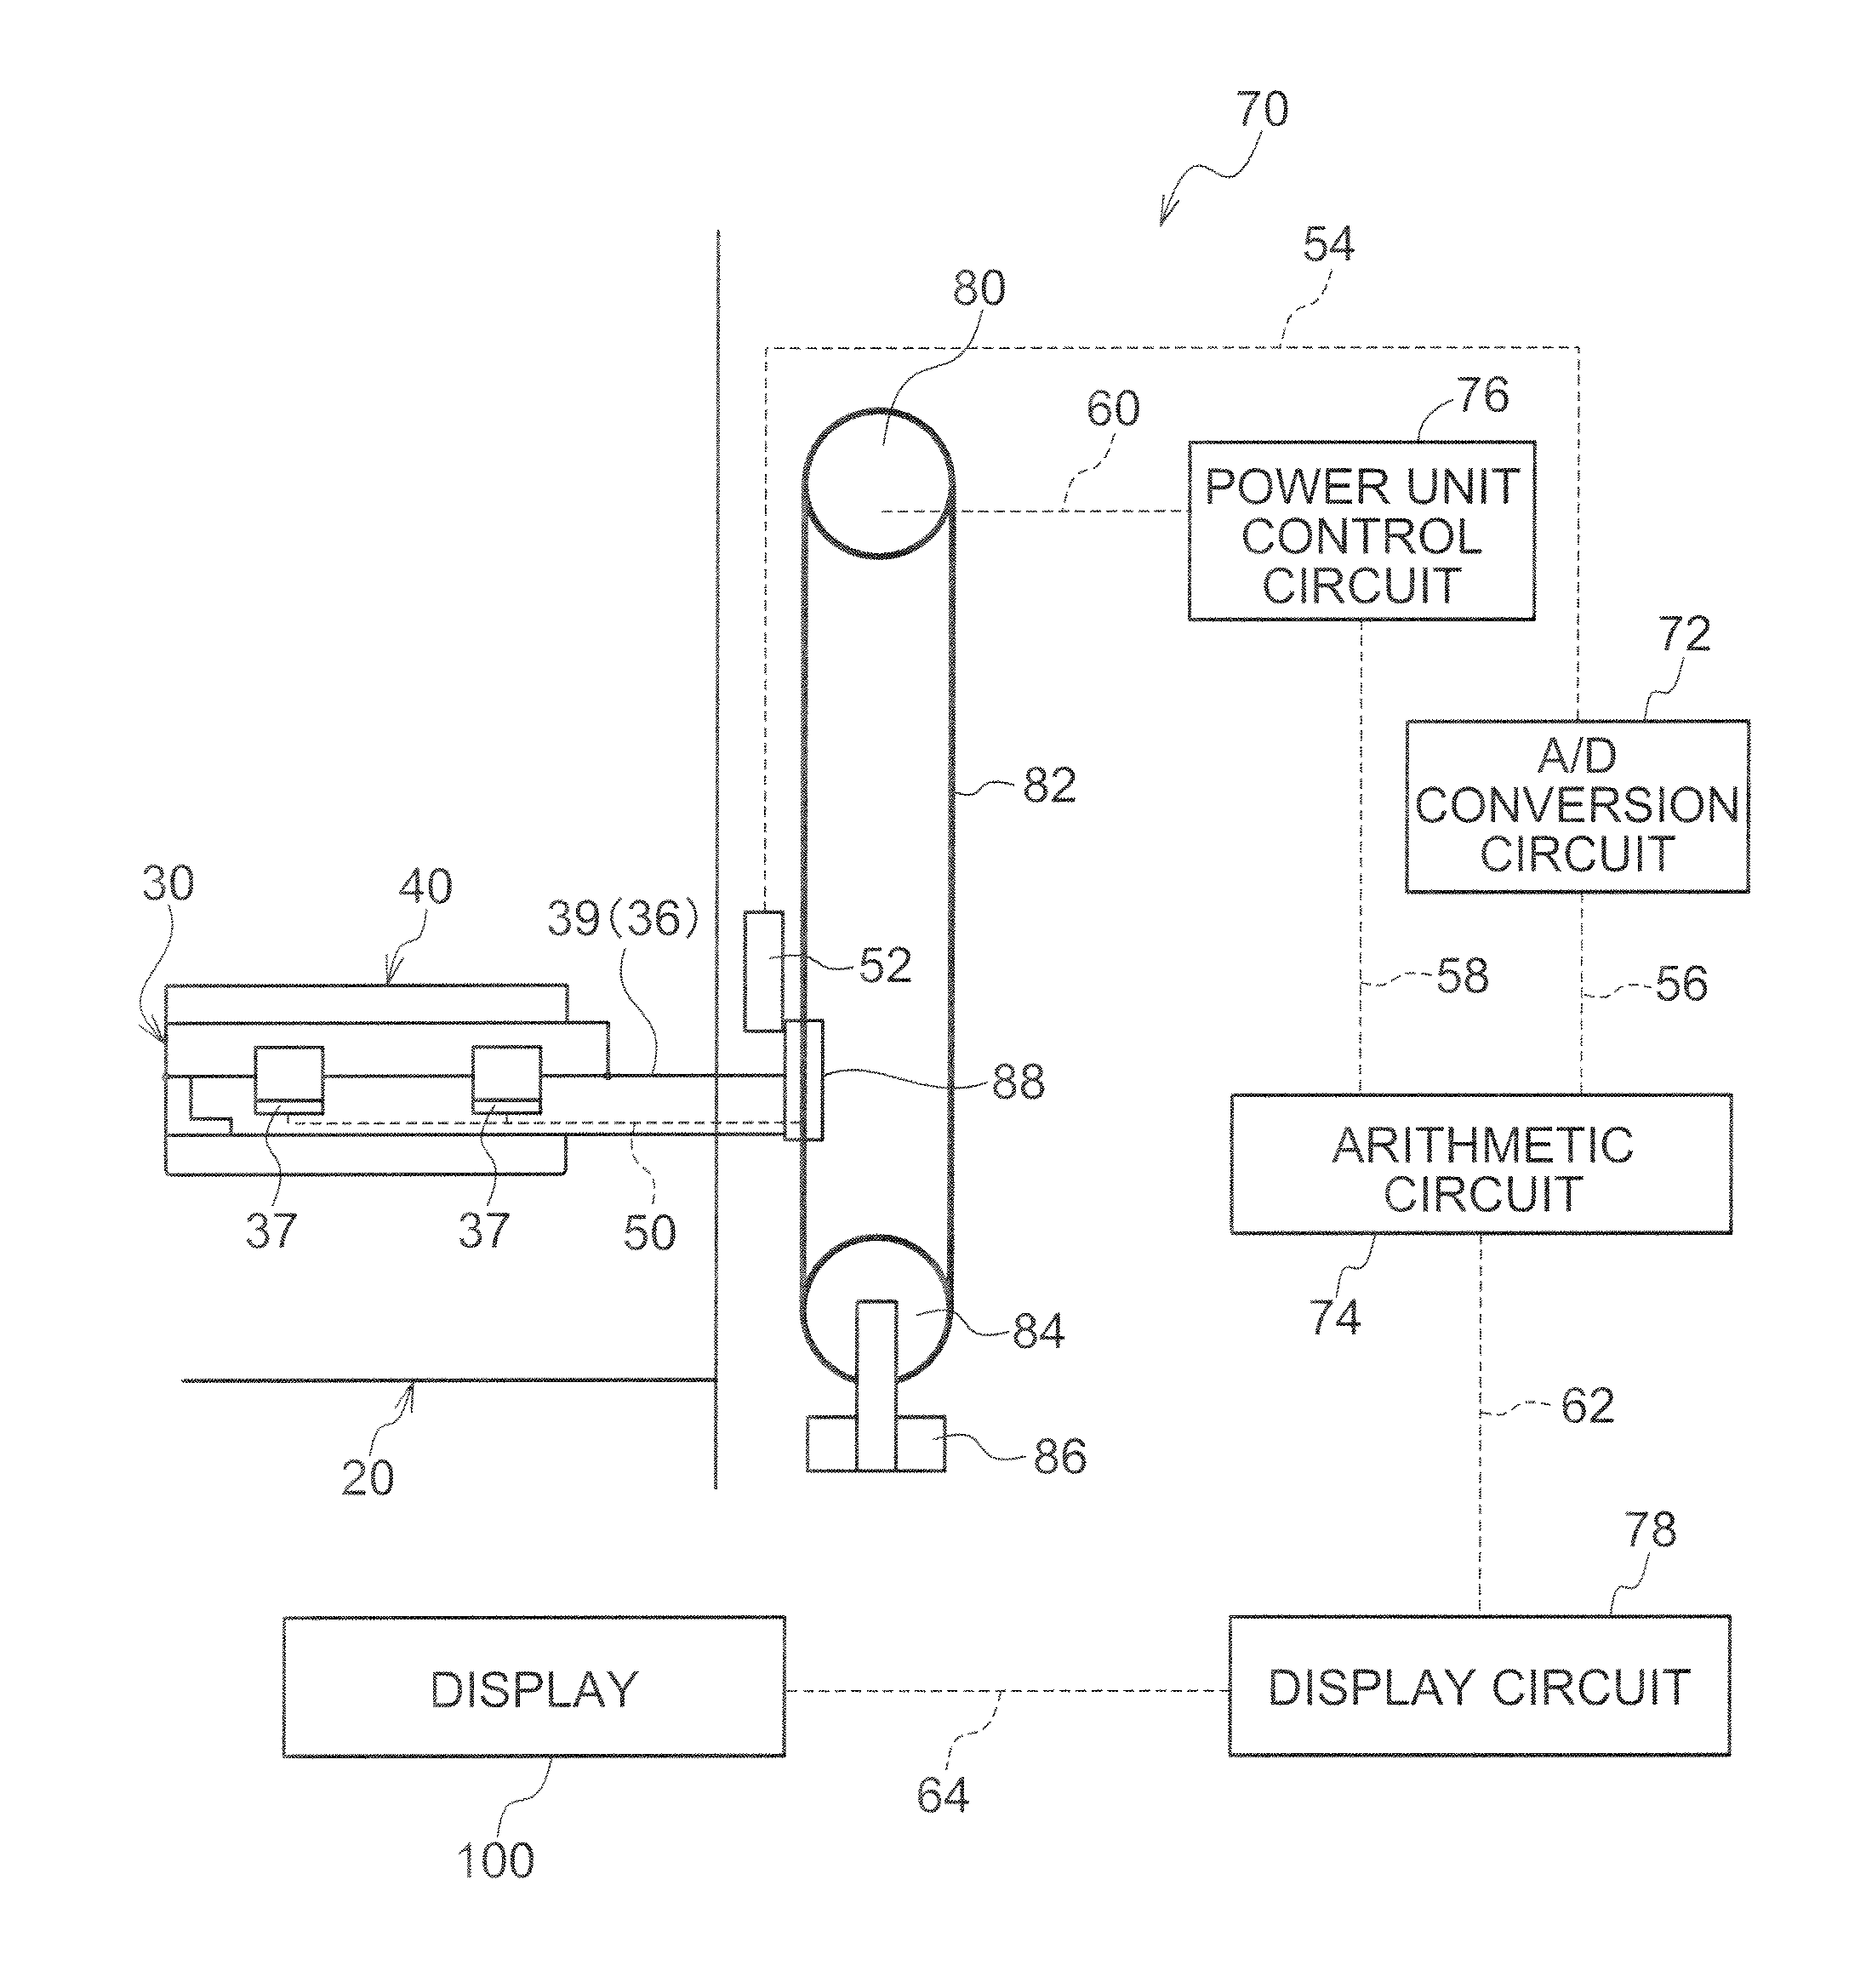 Radiographic image capturing device and compression paddle